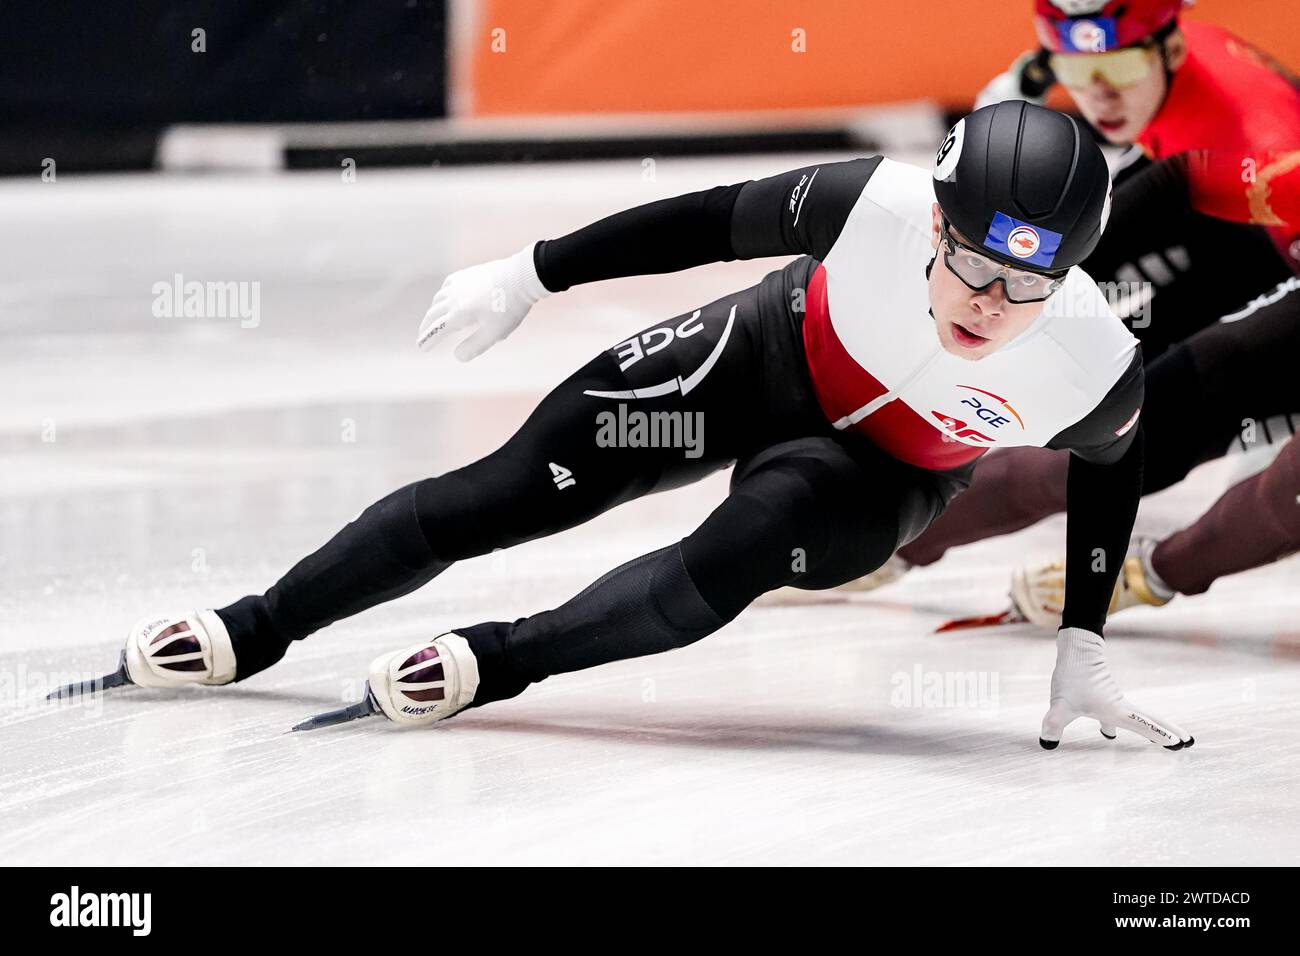 Rotterdam, Netherlands. 17th Mar, 2024. ROTTERDAM, NETHERLANDS - MARCH 17: Michal Niewinski of Poland competing in the Men's 1000m Quarter Final during Day 3 of the ISU World Short Track Speed Skating Championships 2024 at Ahoy on March 17, 2024 in Rotterdam, Netherlands. (Photo by Joris Verwijst/BSR Agency) Credit: BSR Agency/Alamy Live News Stock Photo